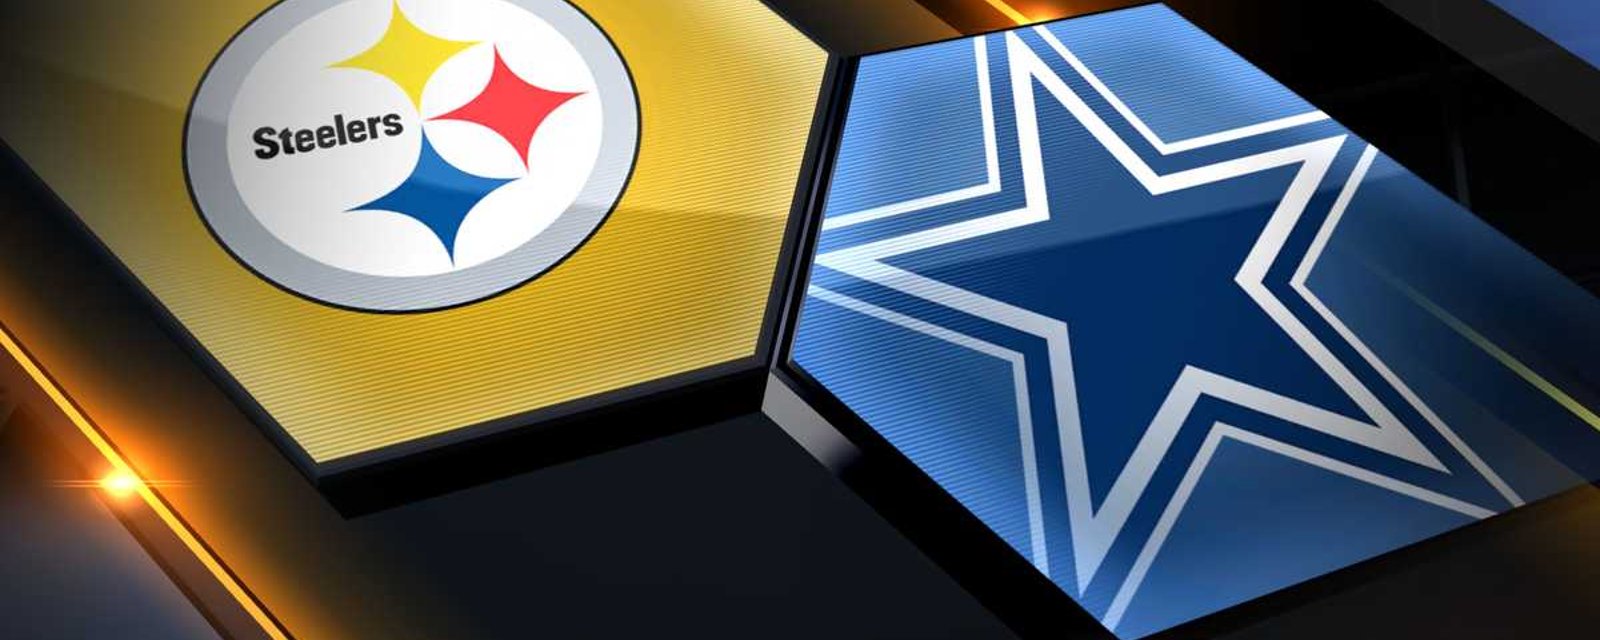 Report: Major trade brewing between Cowboys and Steelers 